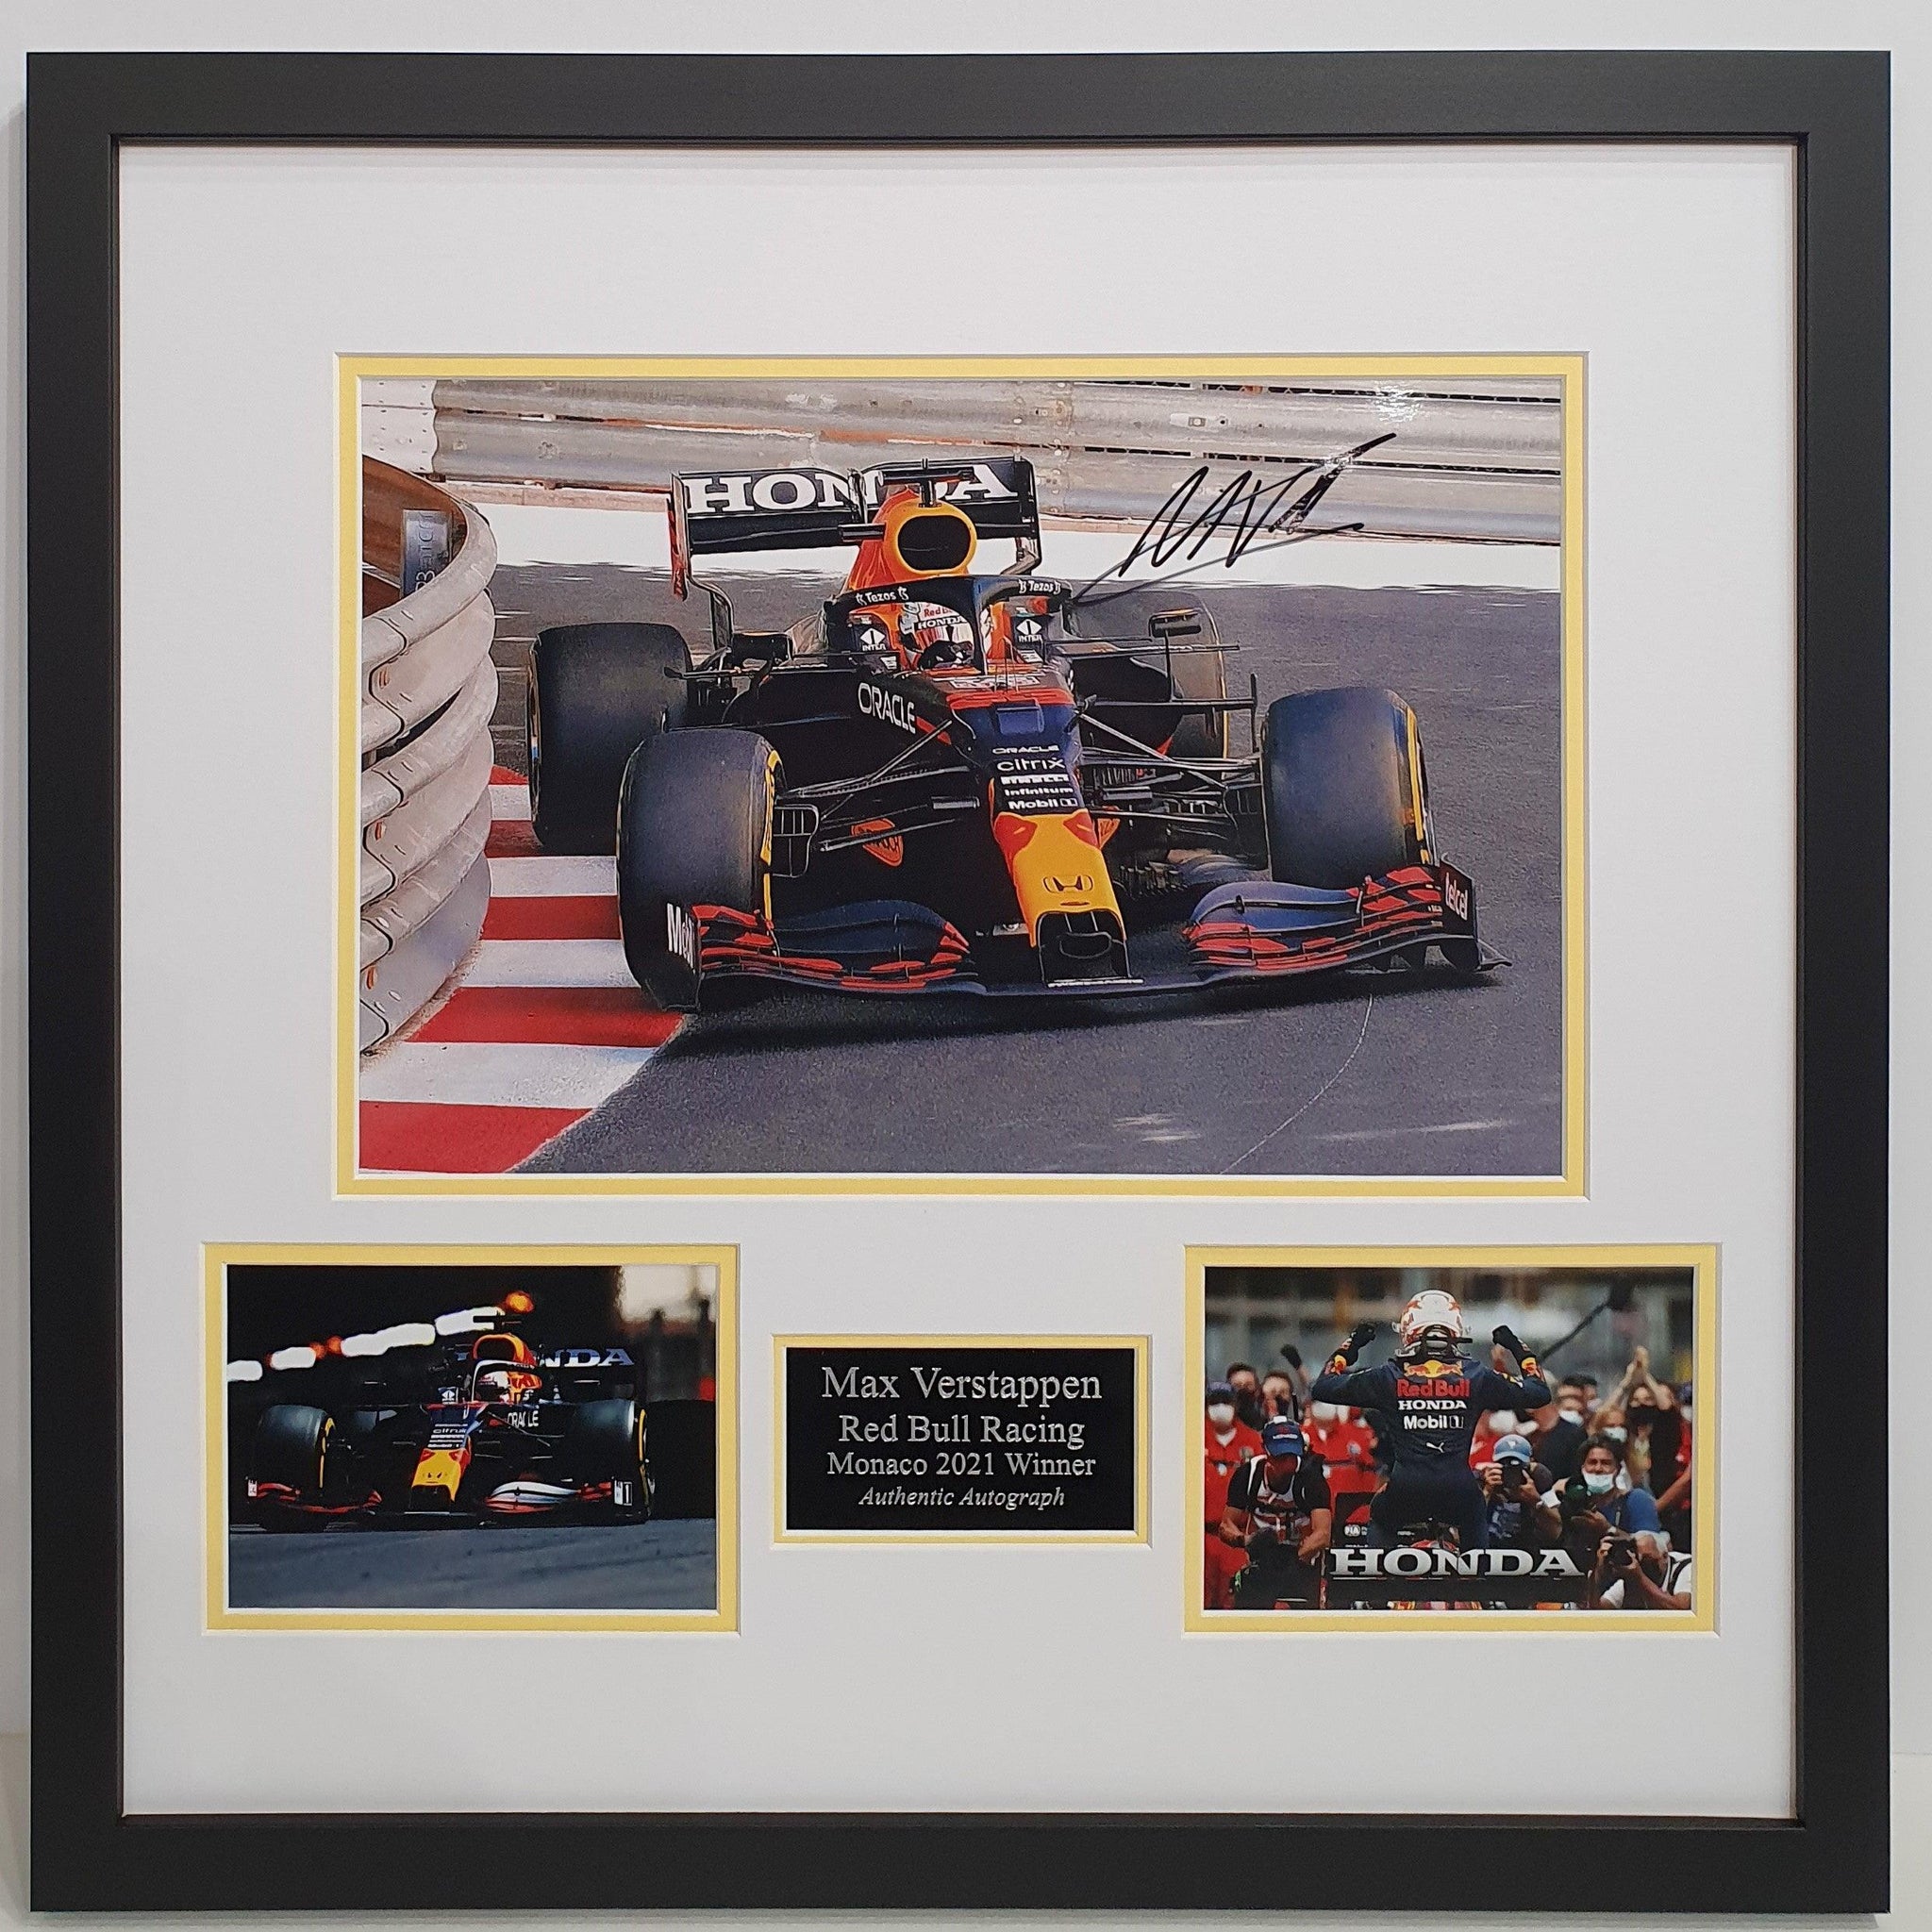 Max Verstappen Signed Red Bull Racing Photo Framed. - Darling Picture Framing